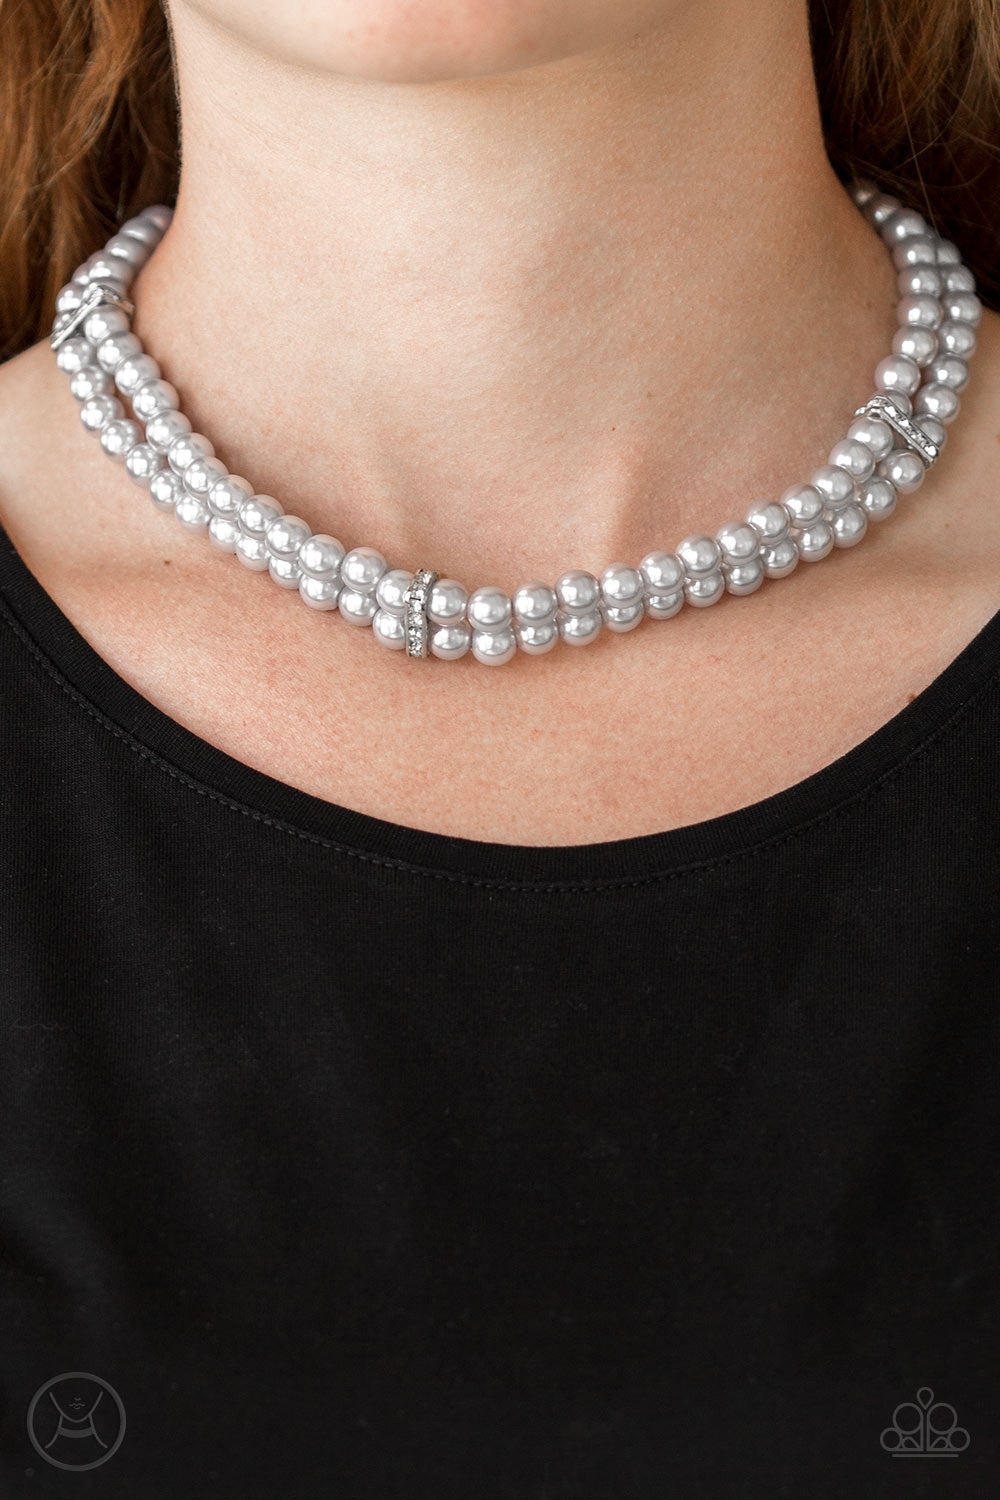 Paparazzi Accessories - Put On Your Party Dress - Silver (Pearls) Necklace